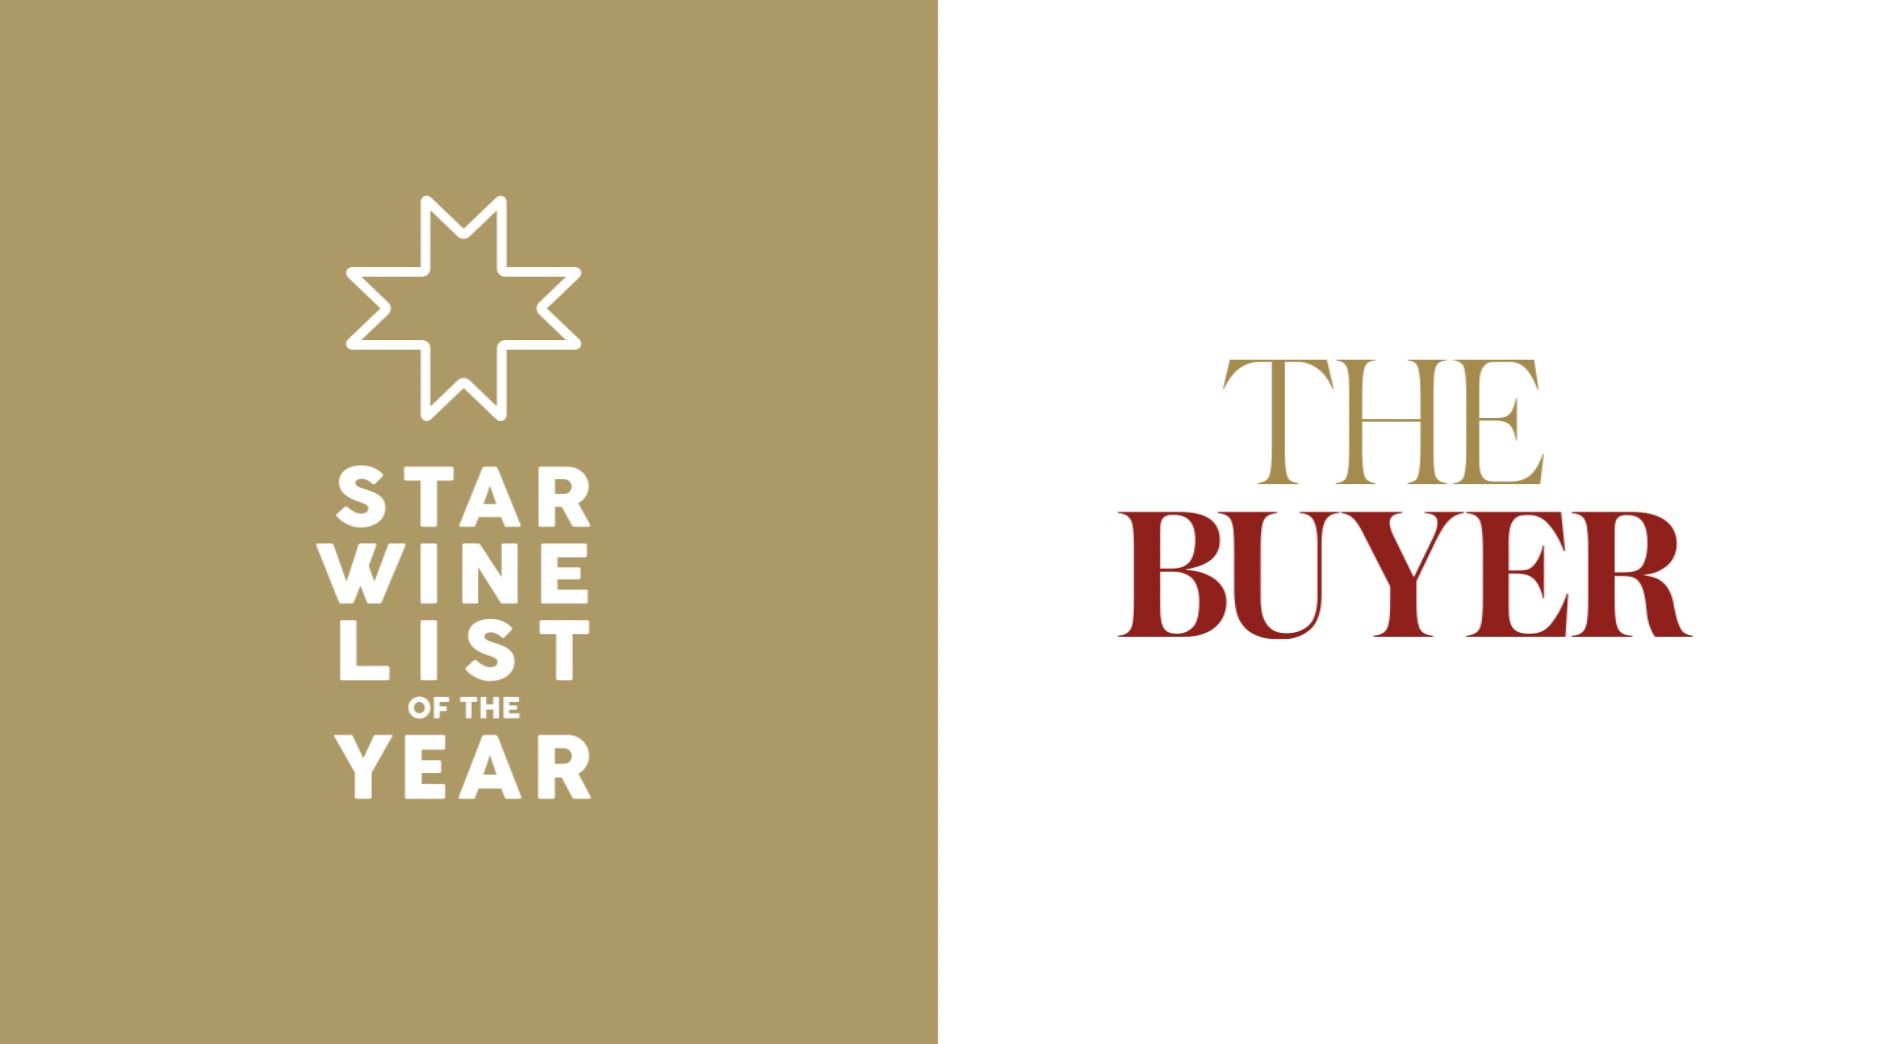 Finalists for Star Wine List of the Year UK with The Buyer